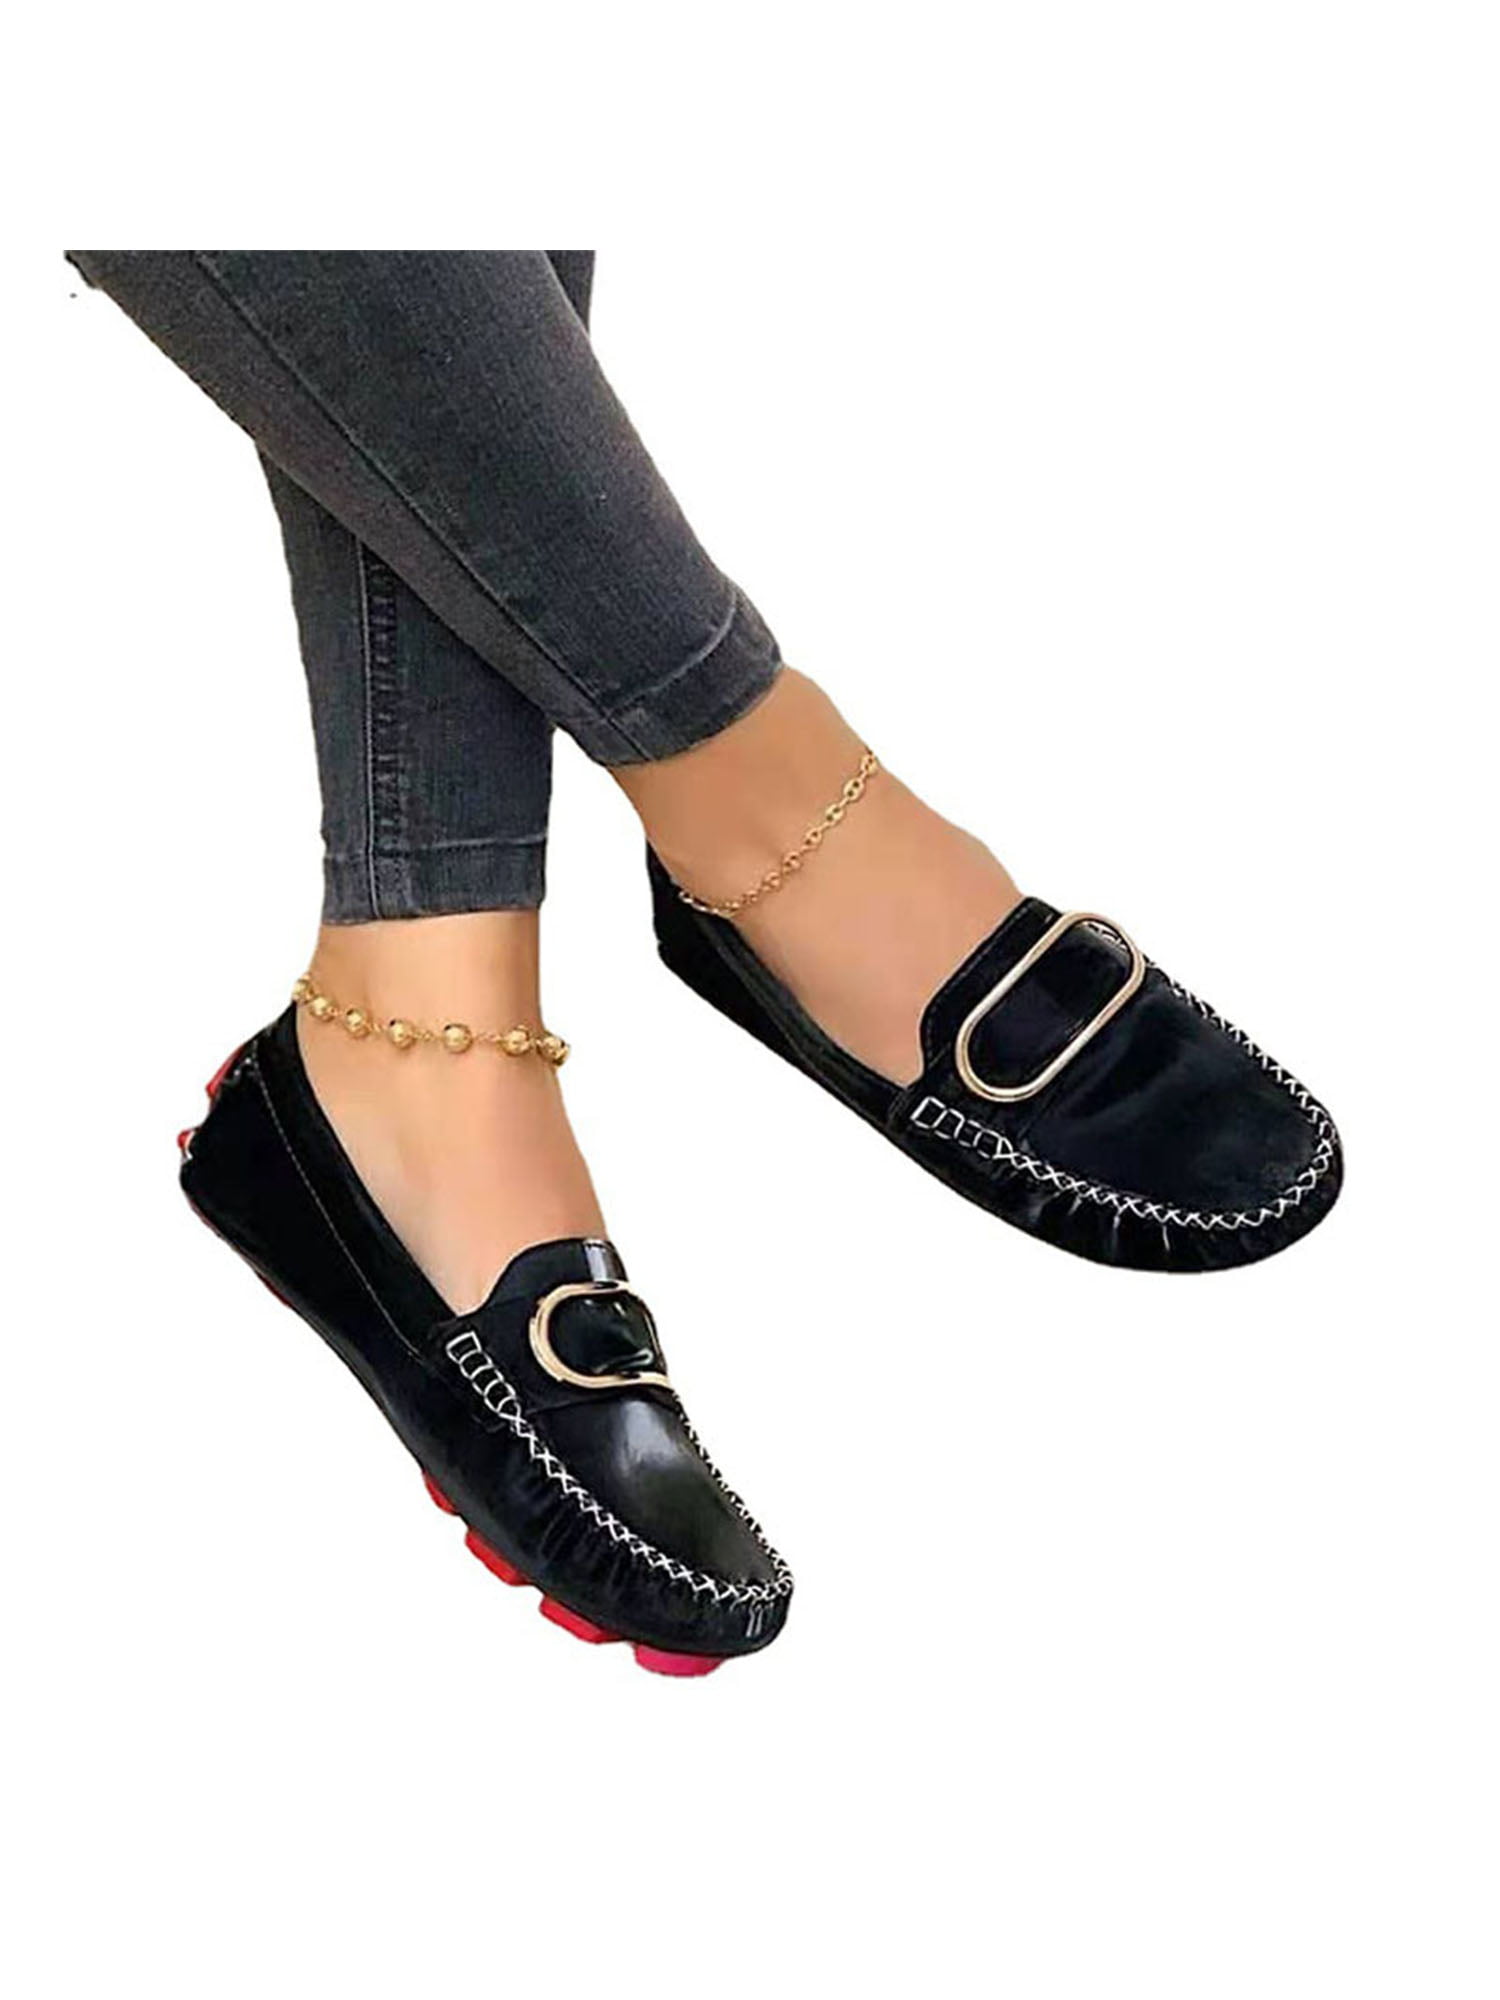 Fashion Womens Pu Leather Loafers Low Top Flats Oxfords Shoes British Plus Size 